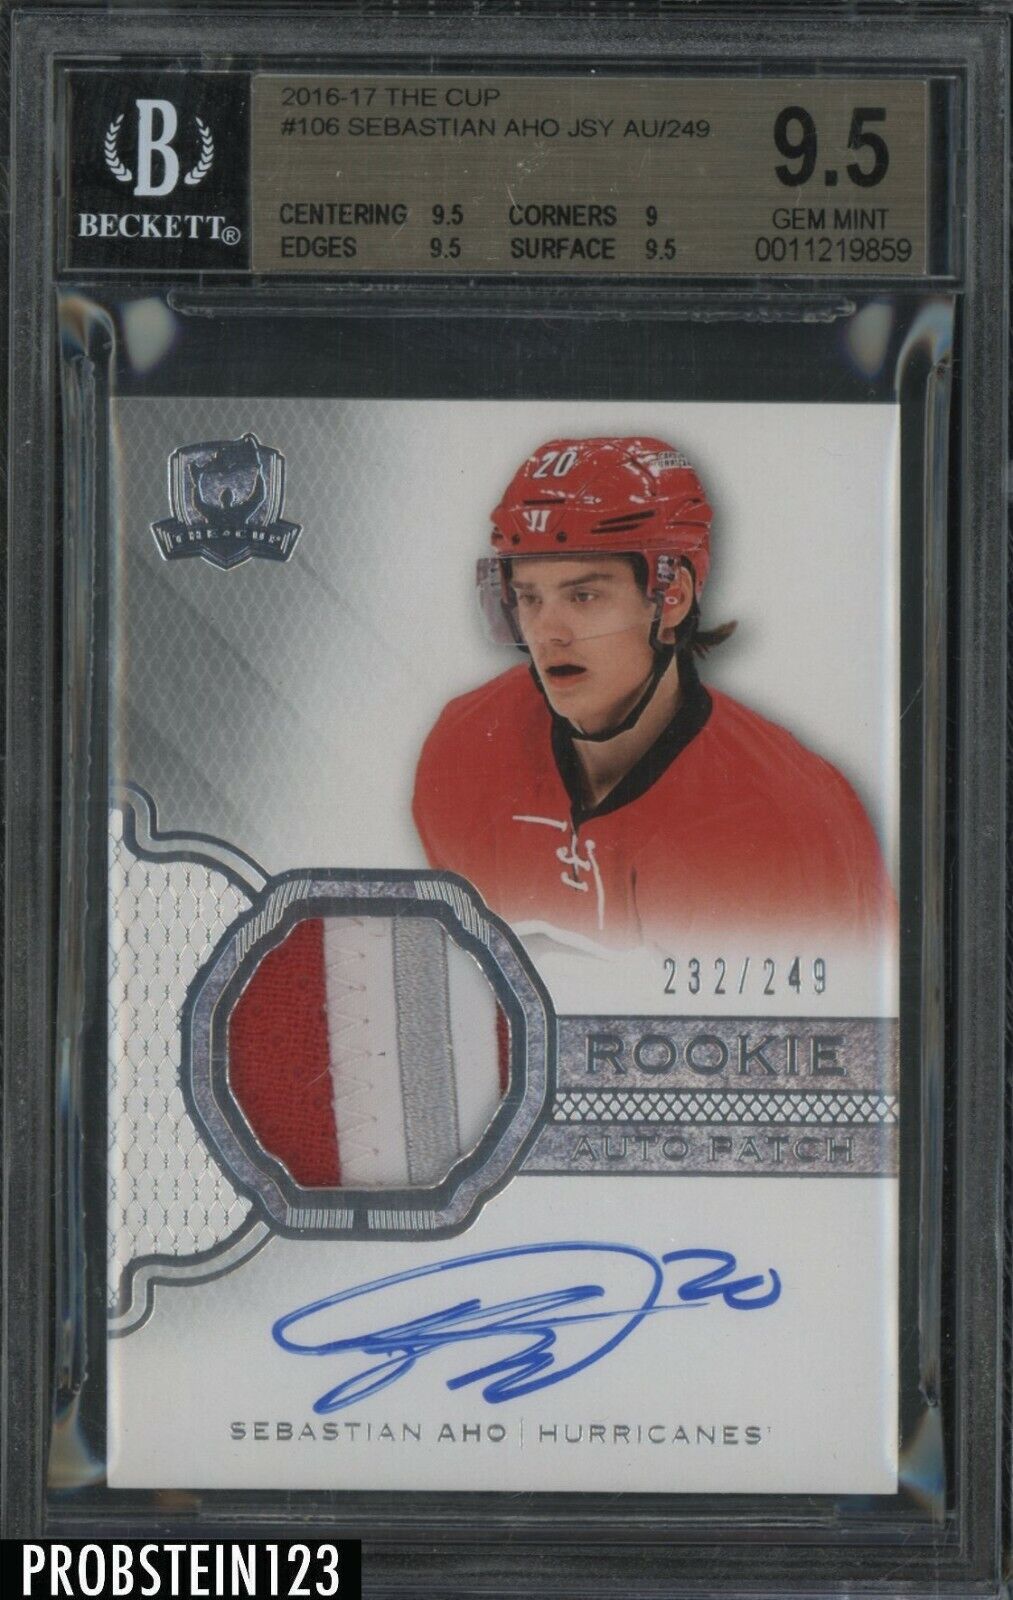 2016-17 THE CUP Sebastian Aho RPA RC Rookie Patch AUTO 232/249 BGS 9.5